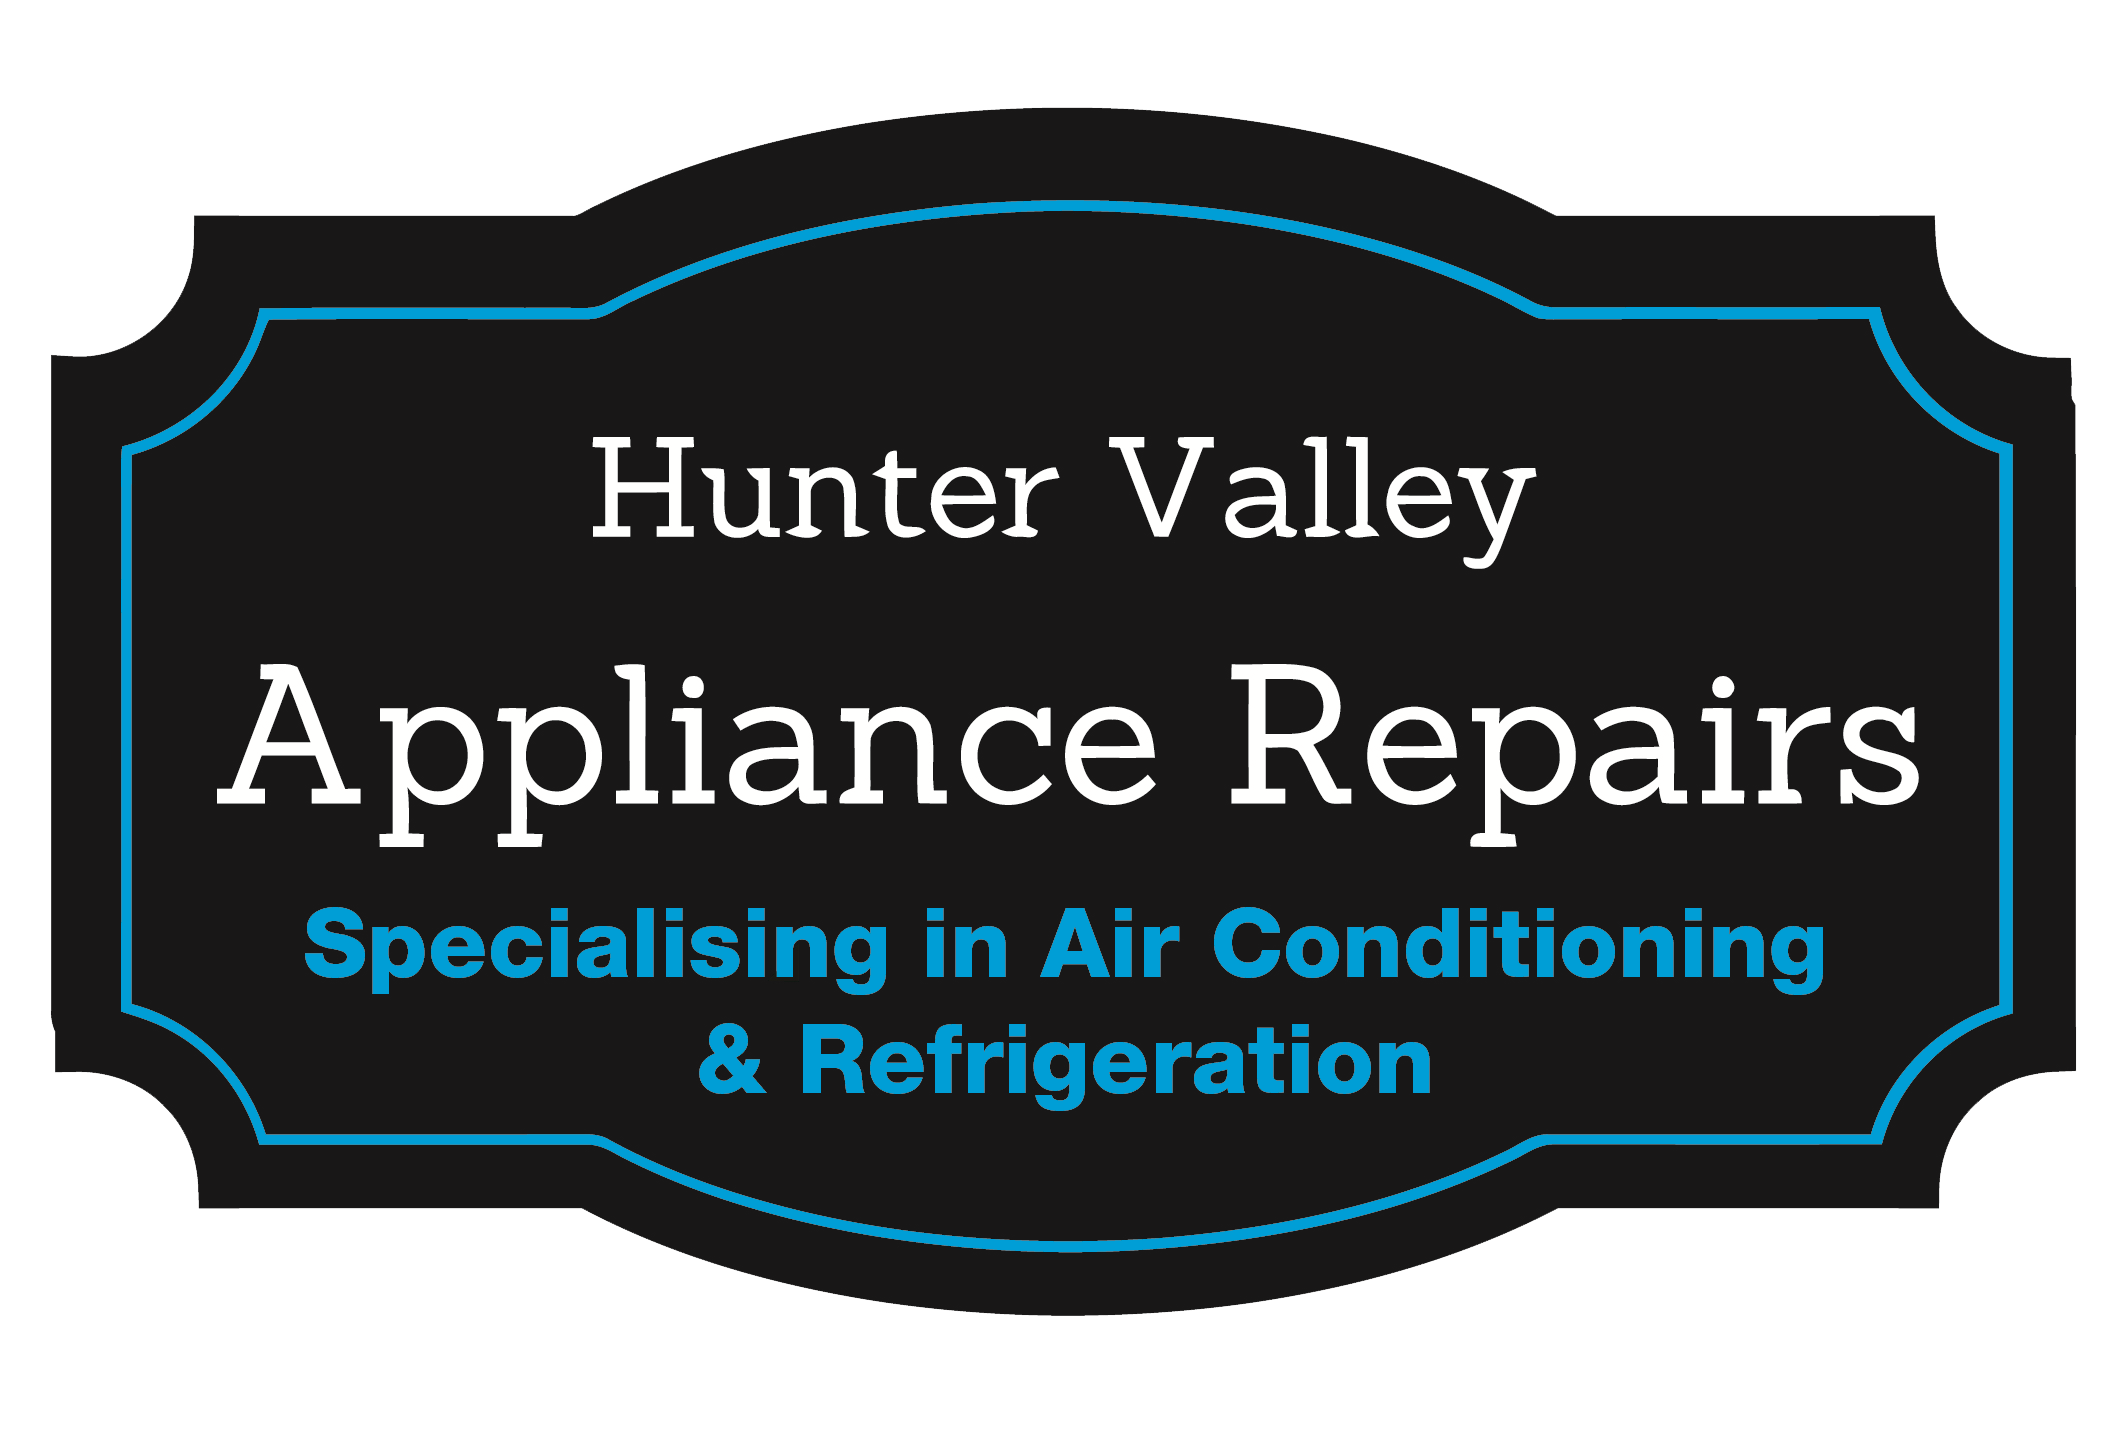 Hunter Valley Appliance Repairs